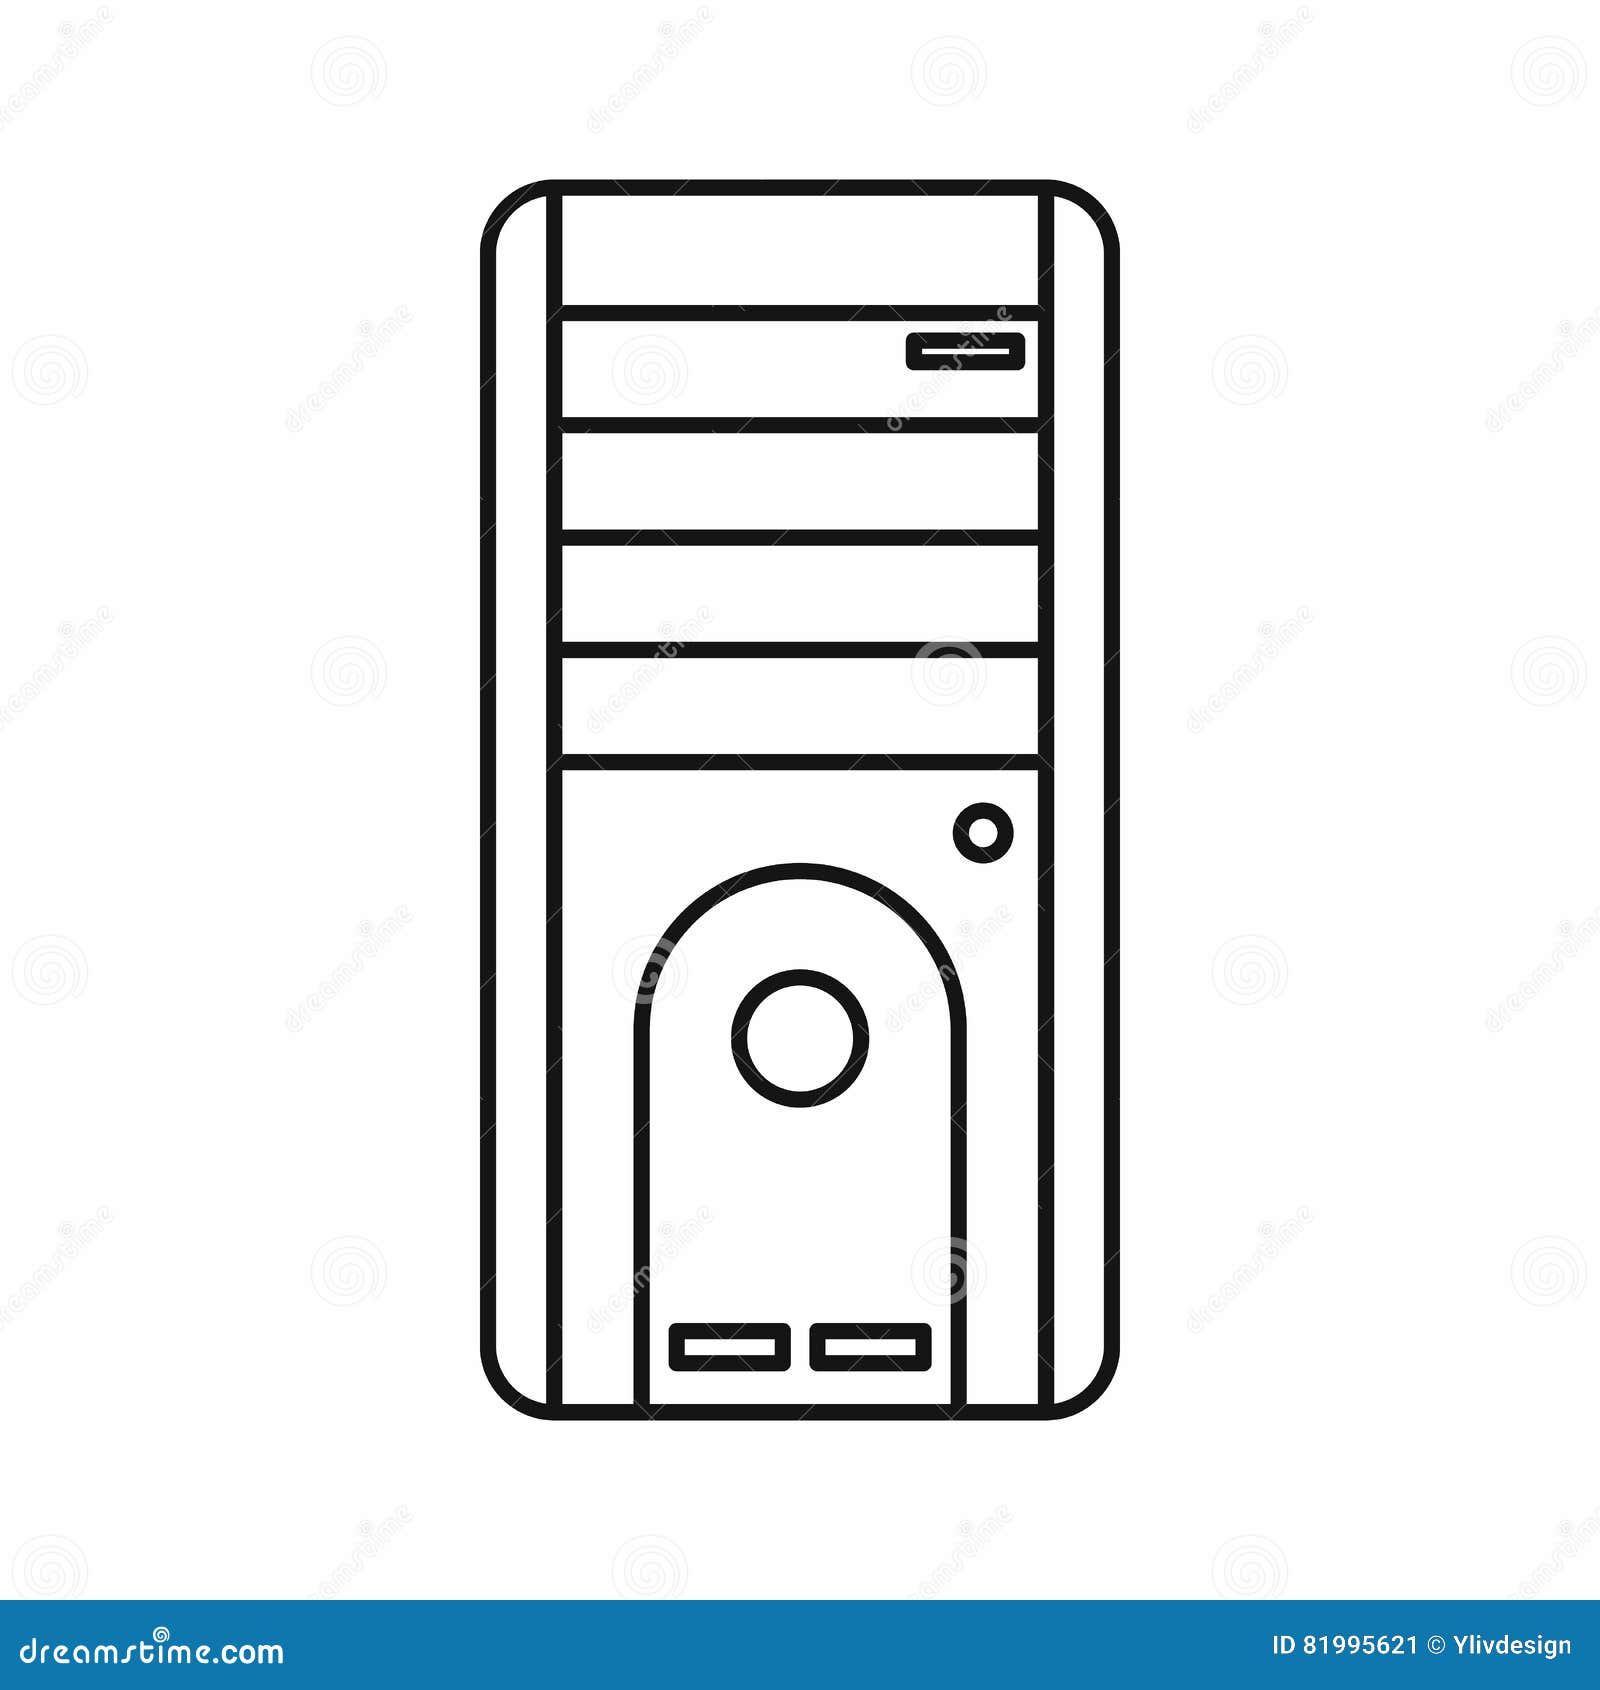 Computer system Illustrations and Clip Art 279606 Computer system royalty  free illustrations and drawings available to search from thousands of stock  vector EPS clipart graphic designers